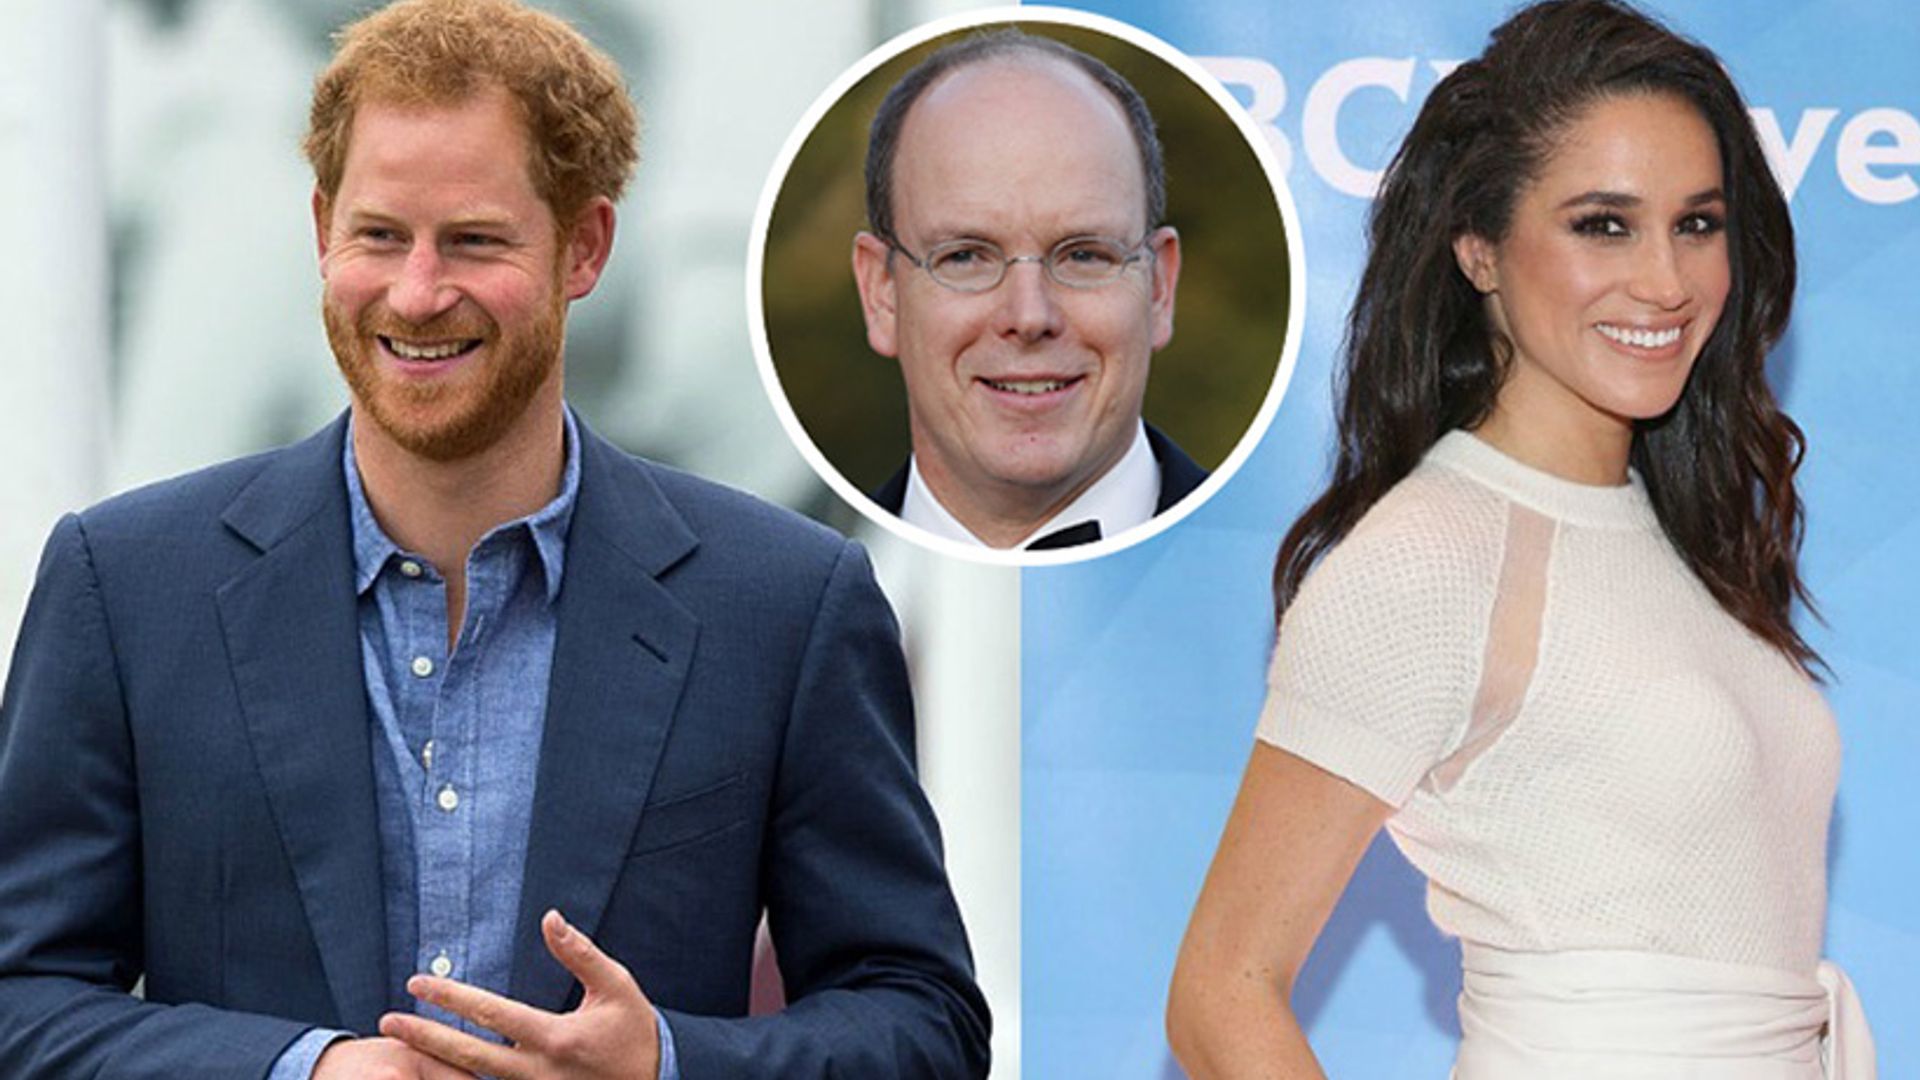 Prince Albert offers relationship advice to Prince Harry